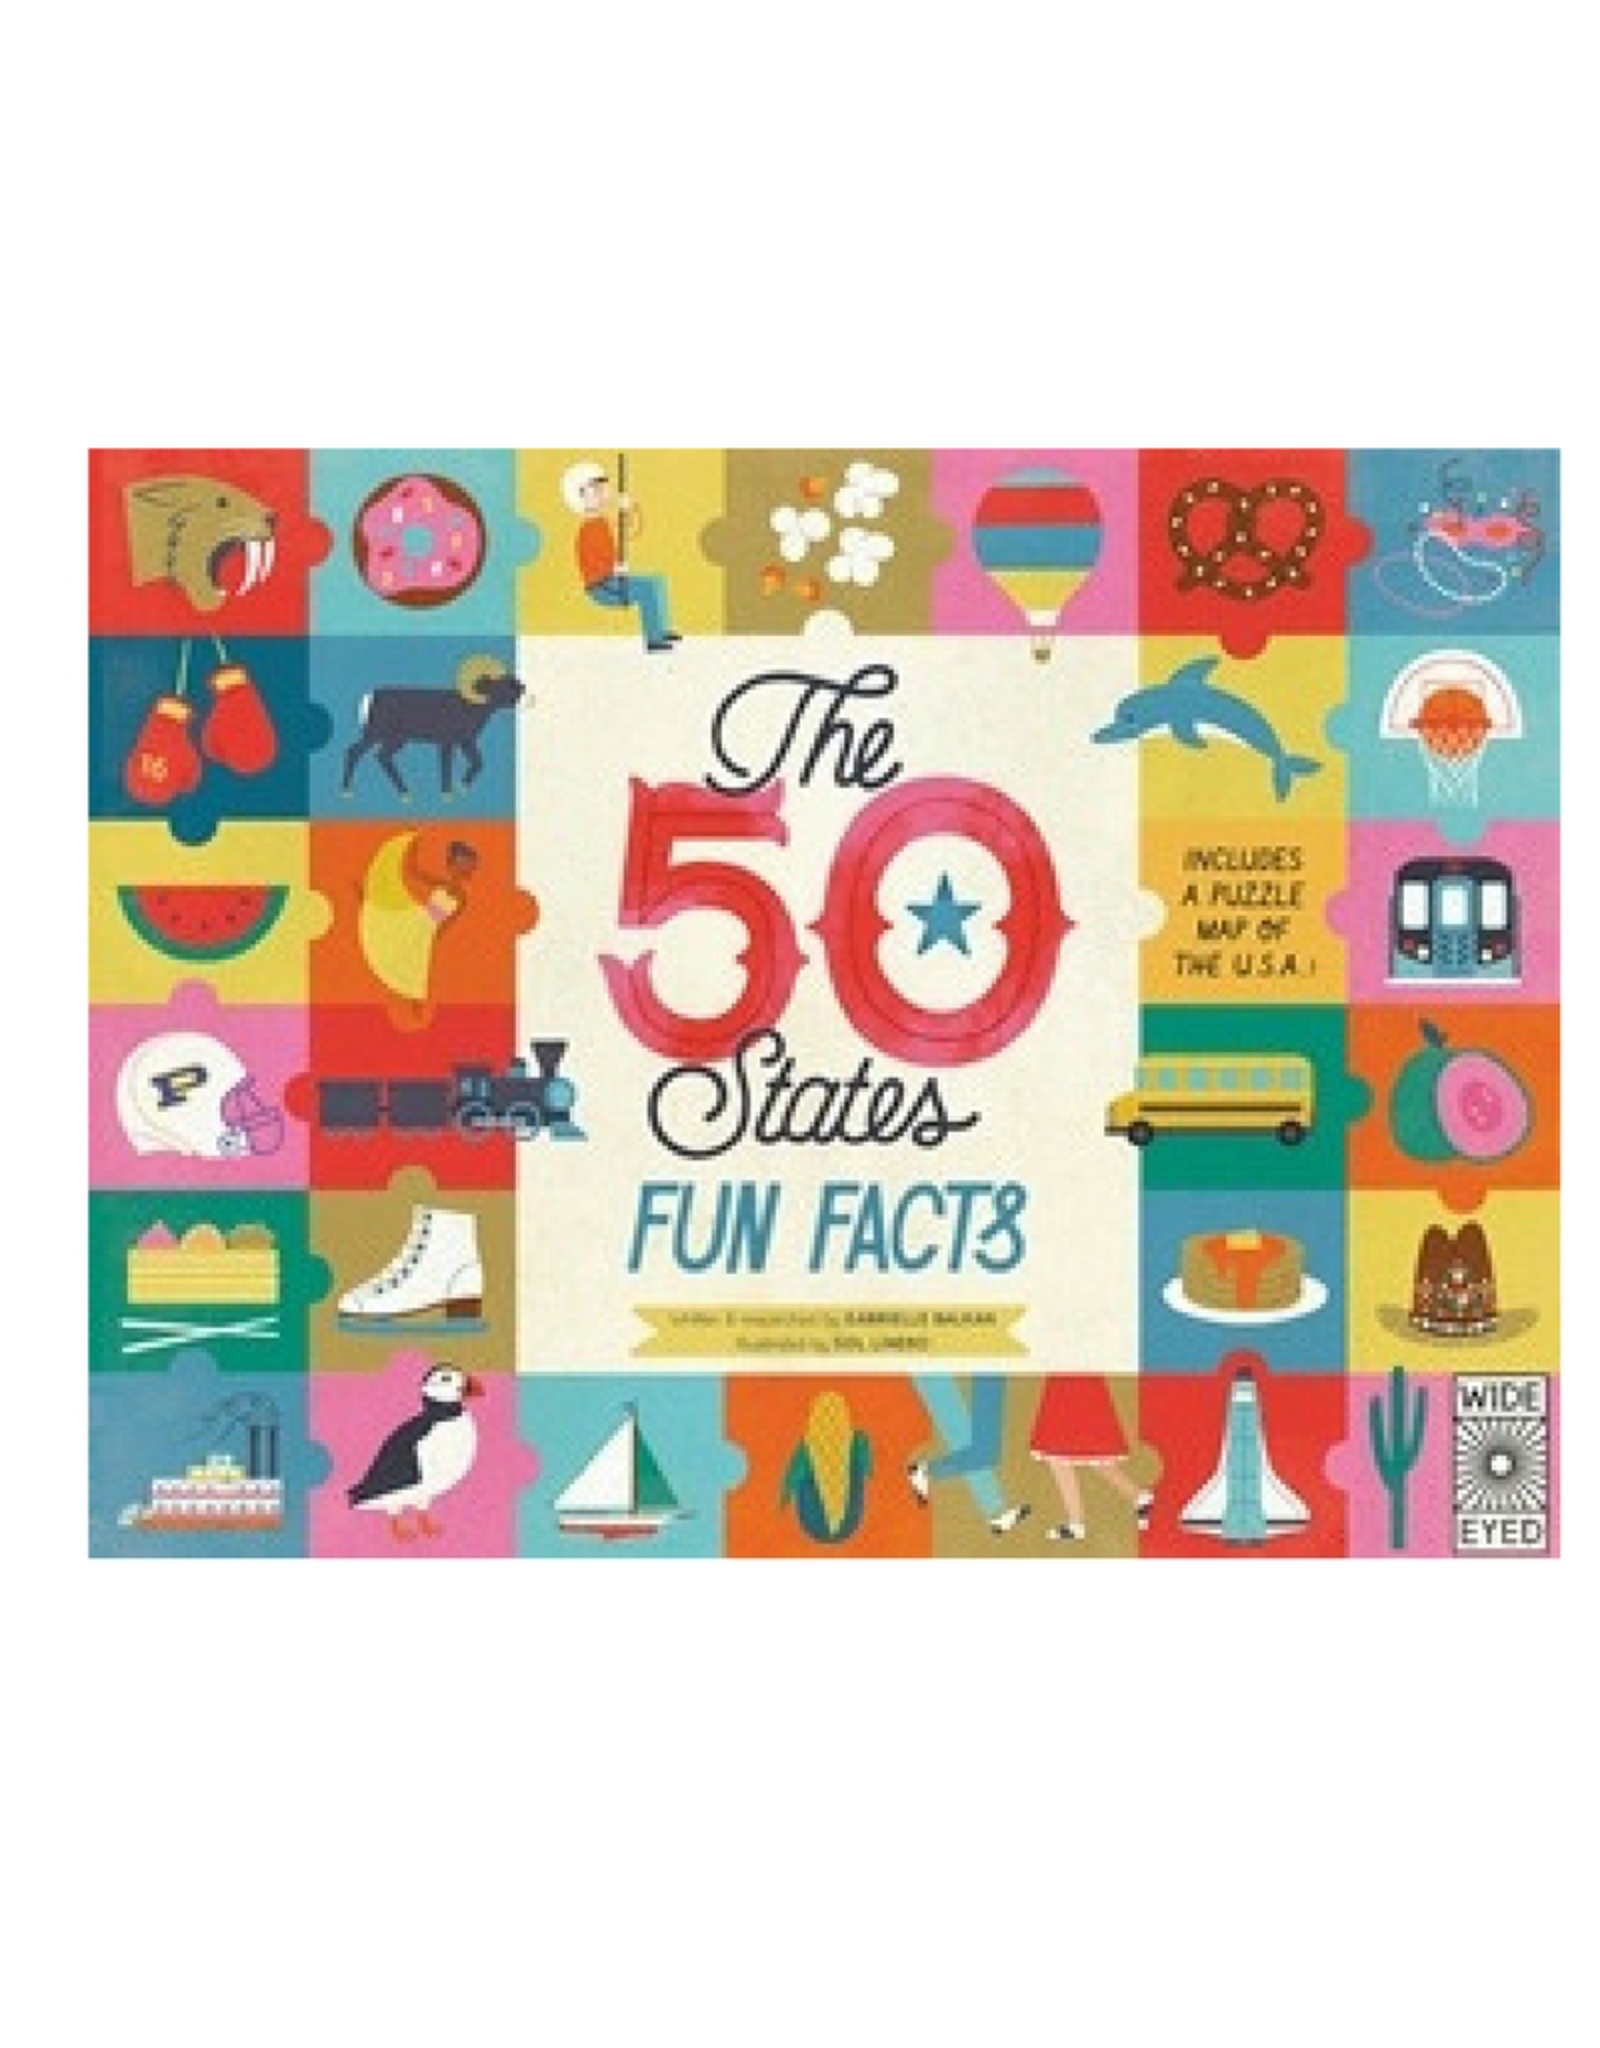 The 50 States Fun Facts by Gabrielle Balkan